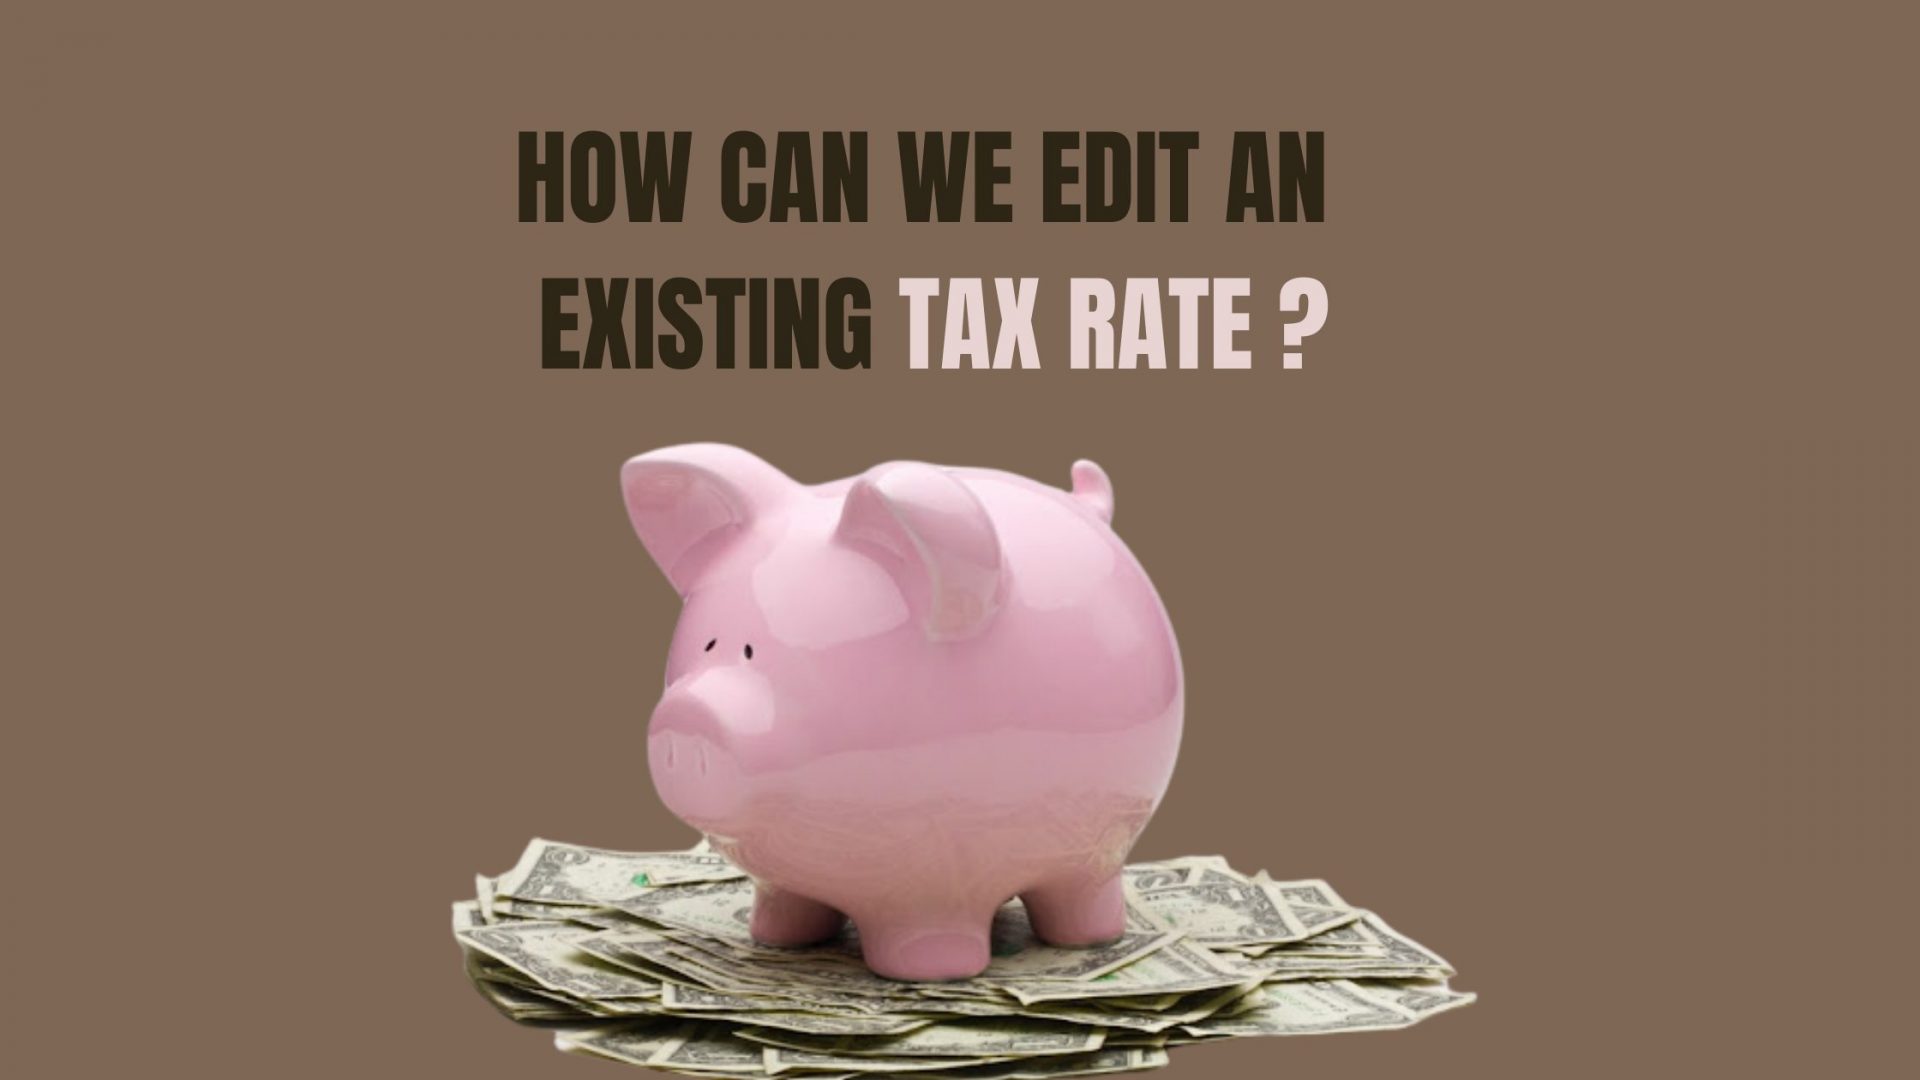 HOW CAN WE EDIT AN EXISTING TAX RATE (2)